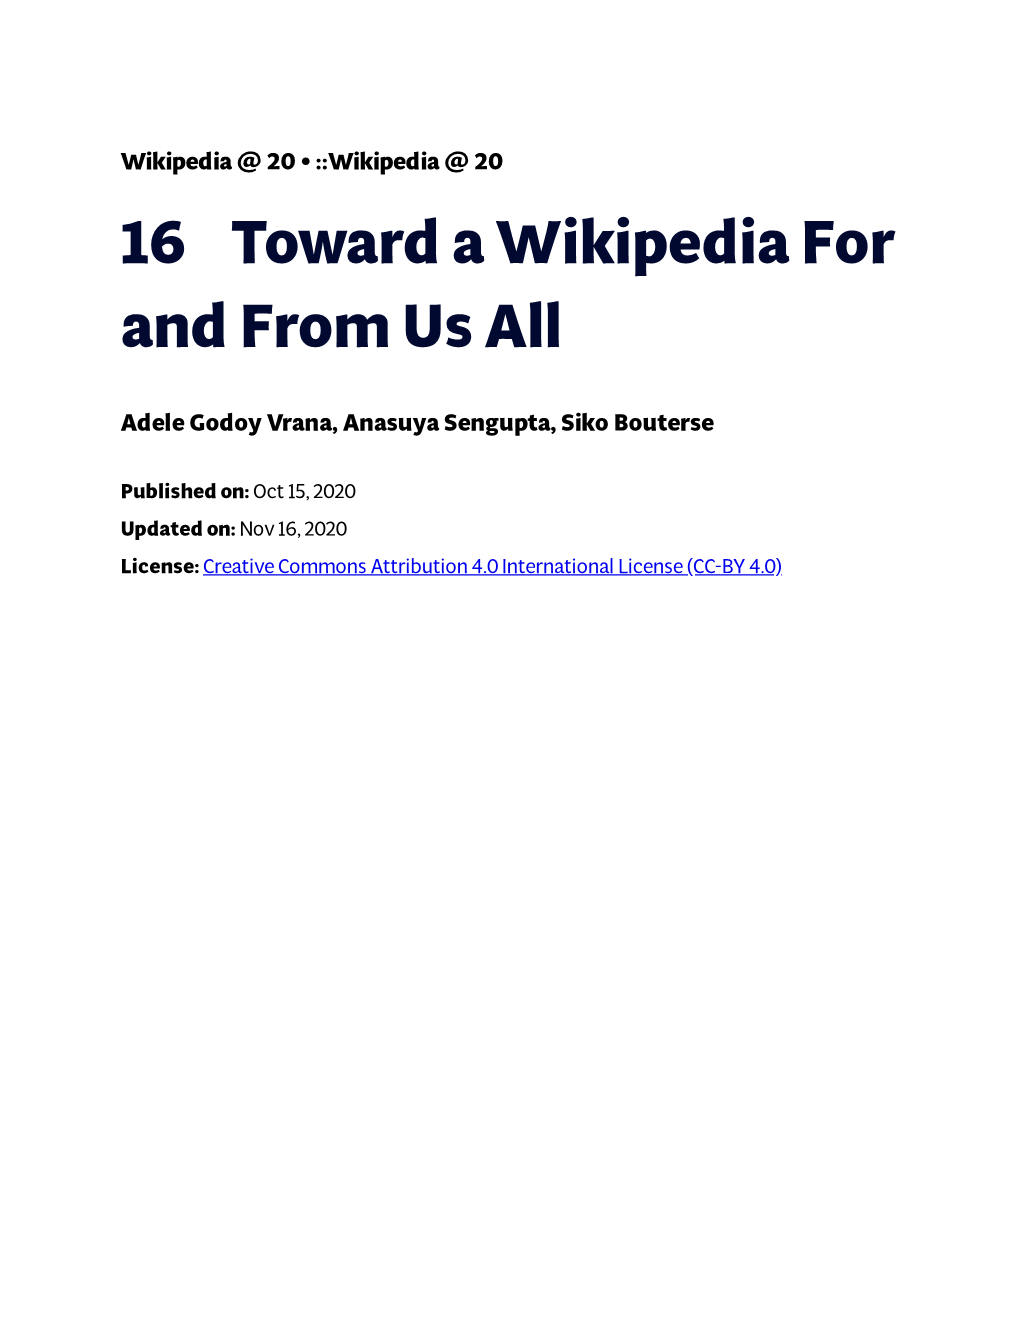 16€€€€Toward a Wikipedia for and from Us